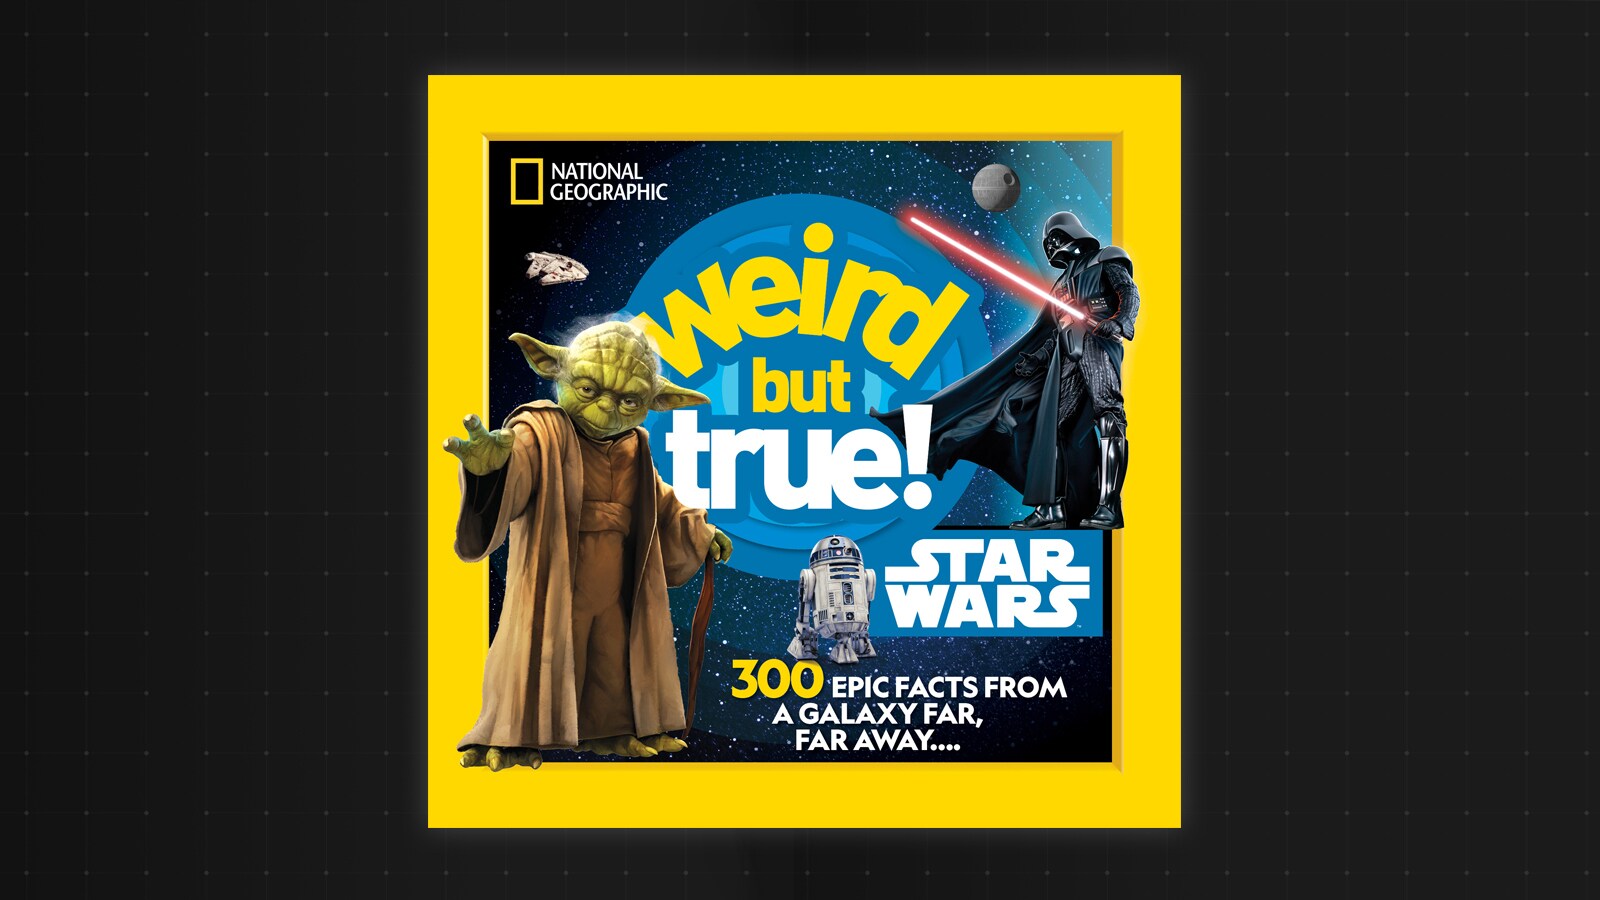 Weird But True! Star Wars Will Highlight Strange Galactic Facts and Trivia – First Look